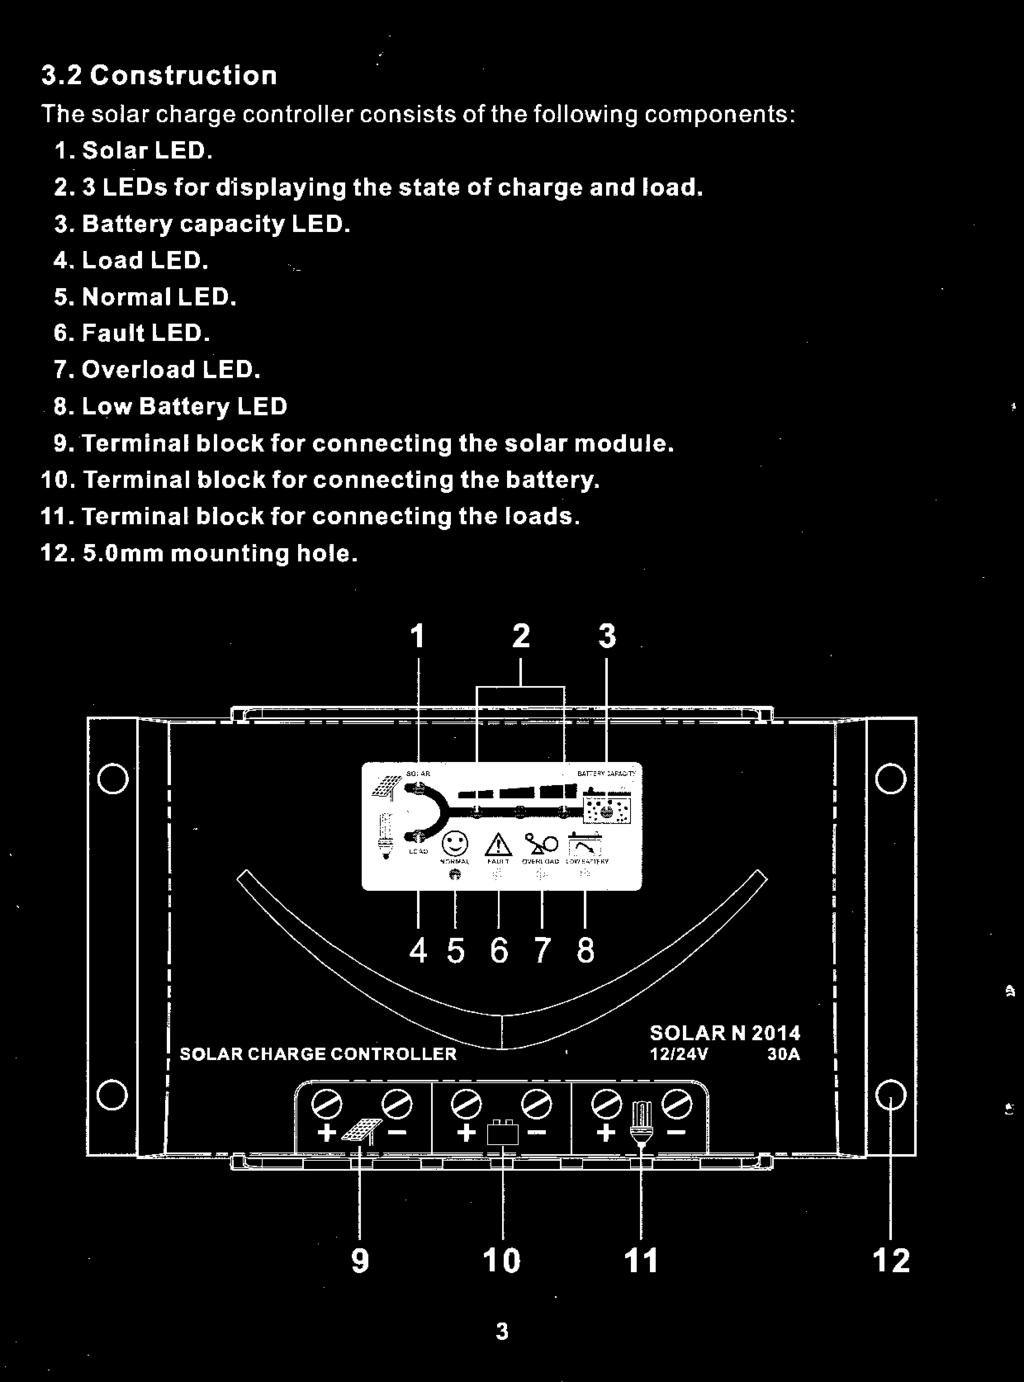 3.2 Construction The solar charge controller consists of the following components: 1. Solar LED. 2. 3 LEOs for displaying the state of charge and load. 3. Battery capacity LED. 4. Load LED. 5.